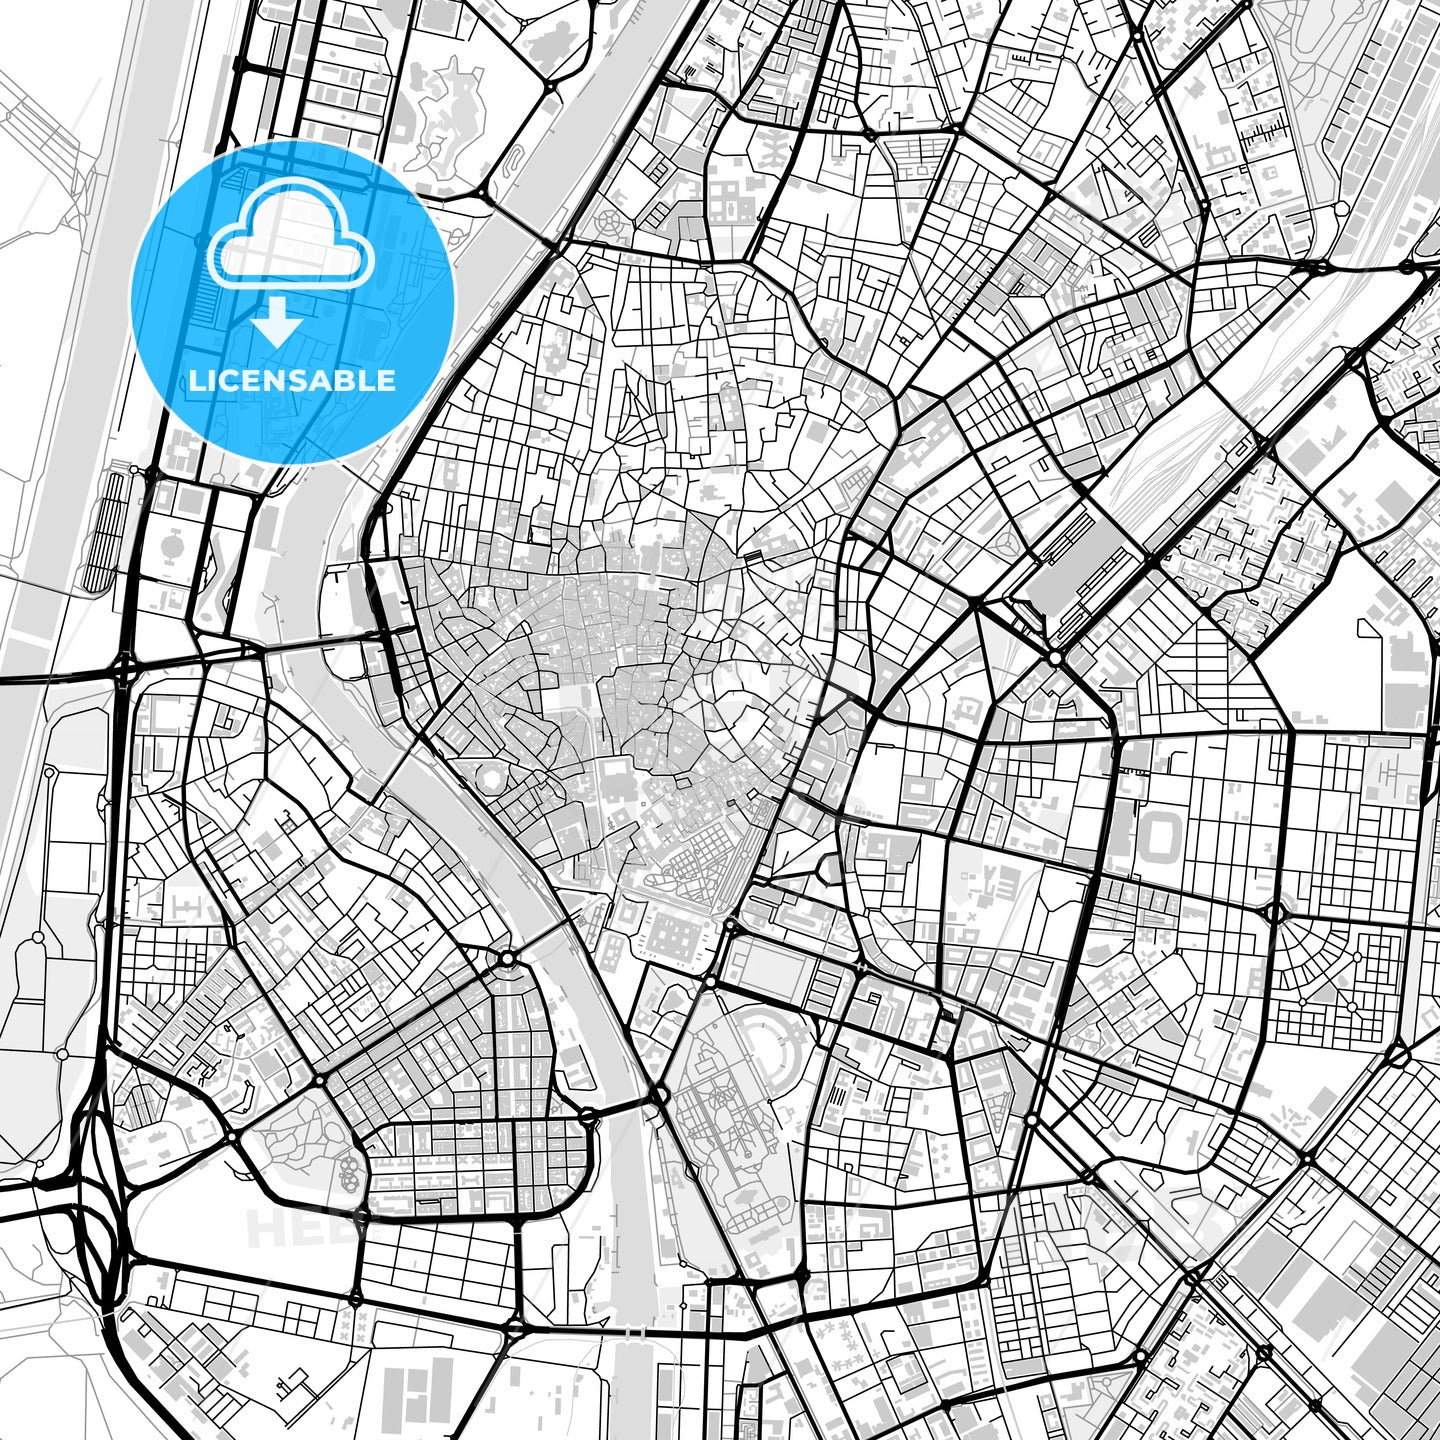 Downtown map of Seville, light